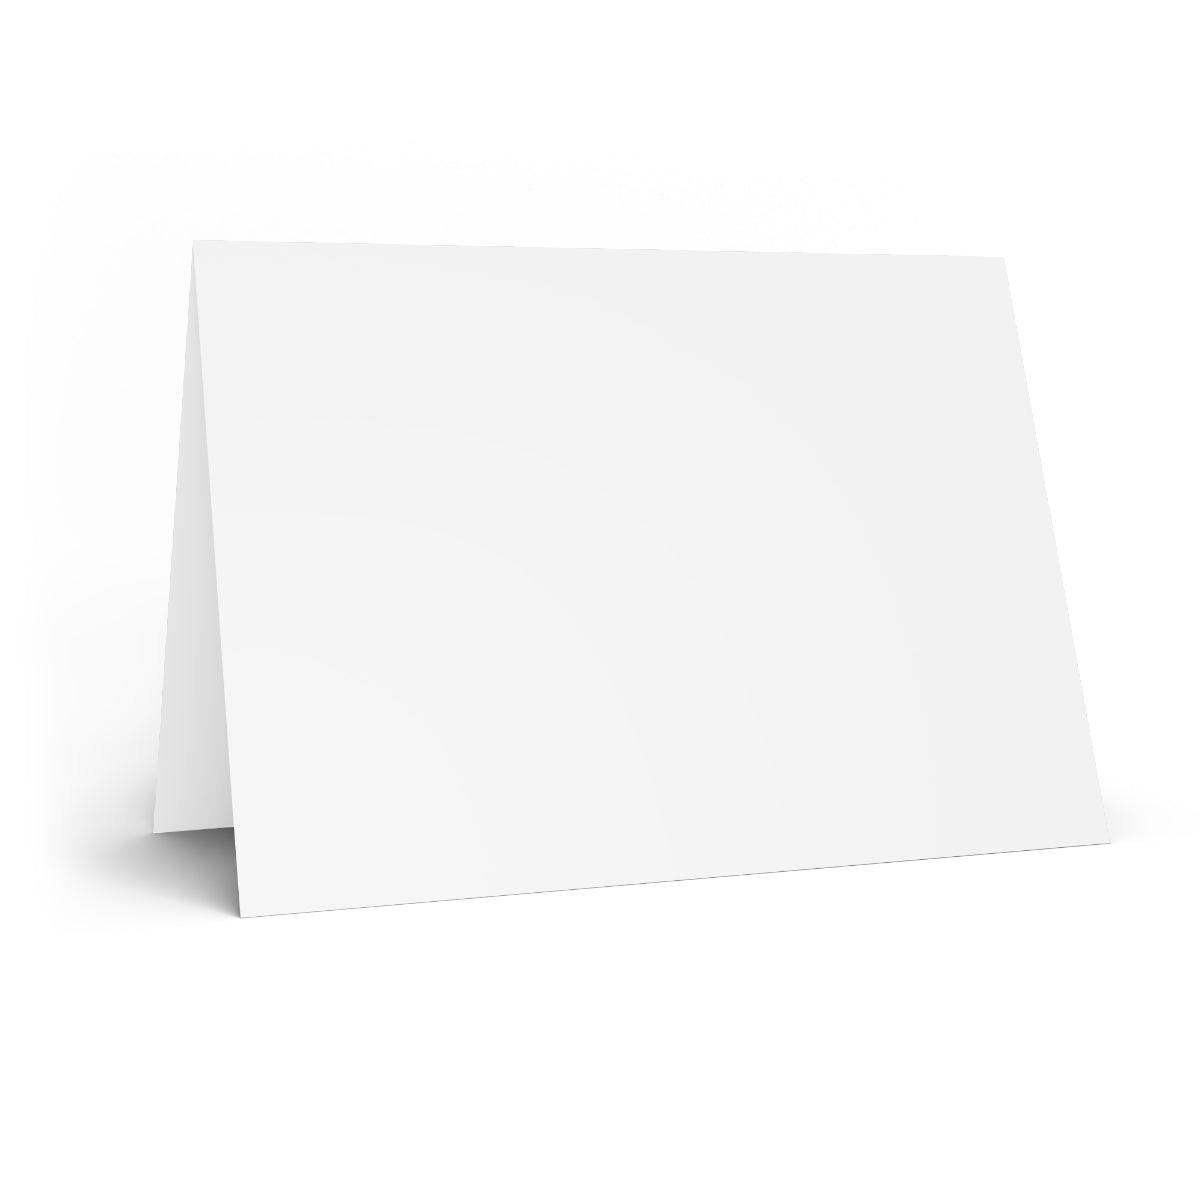 Can't Live Without You - Folded Greeting Cards